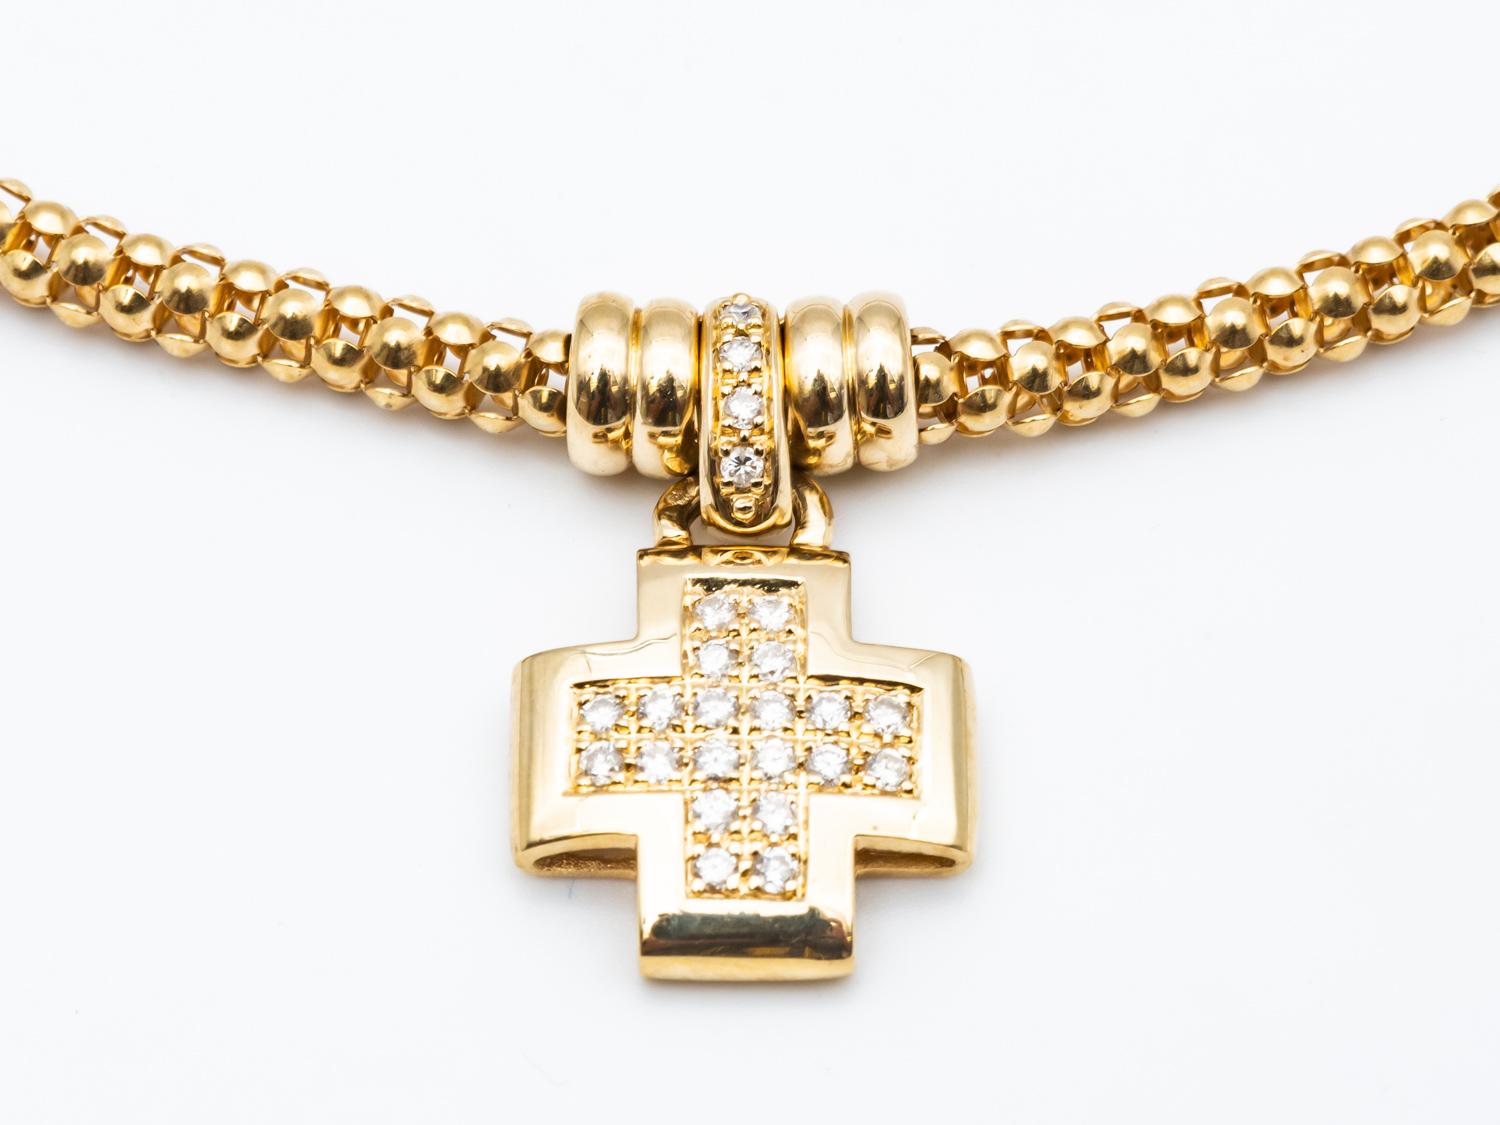 Yellow Gold 18 Karat Necklace With A Cross Pendant.Articulated Diamond Paving.
0,30 carats diamond pavage on the cross is color His
.